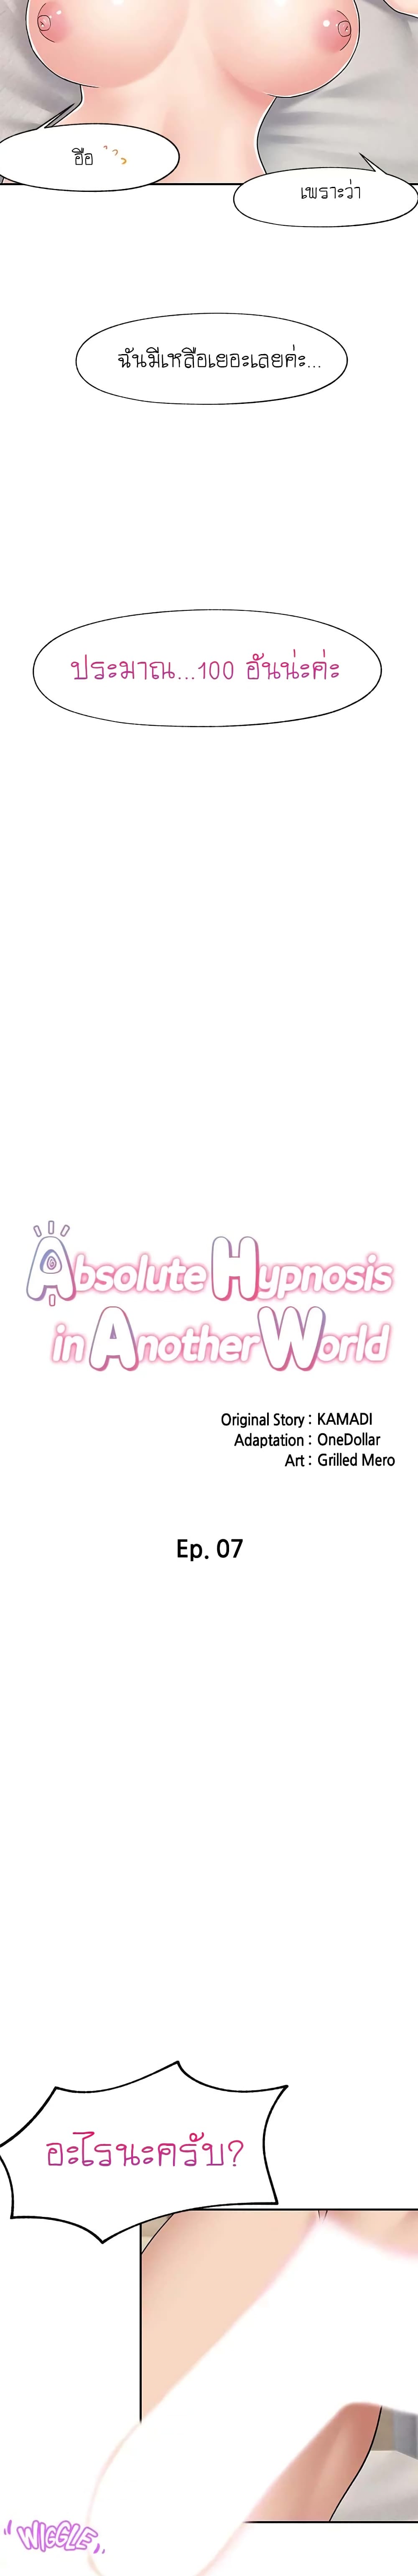 Absolute Hypnosis in Another World 7 (5)